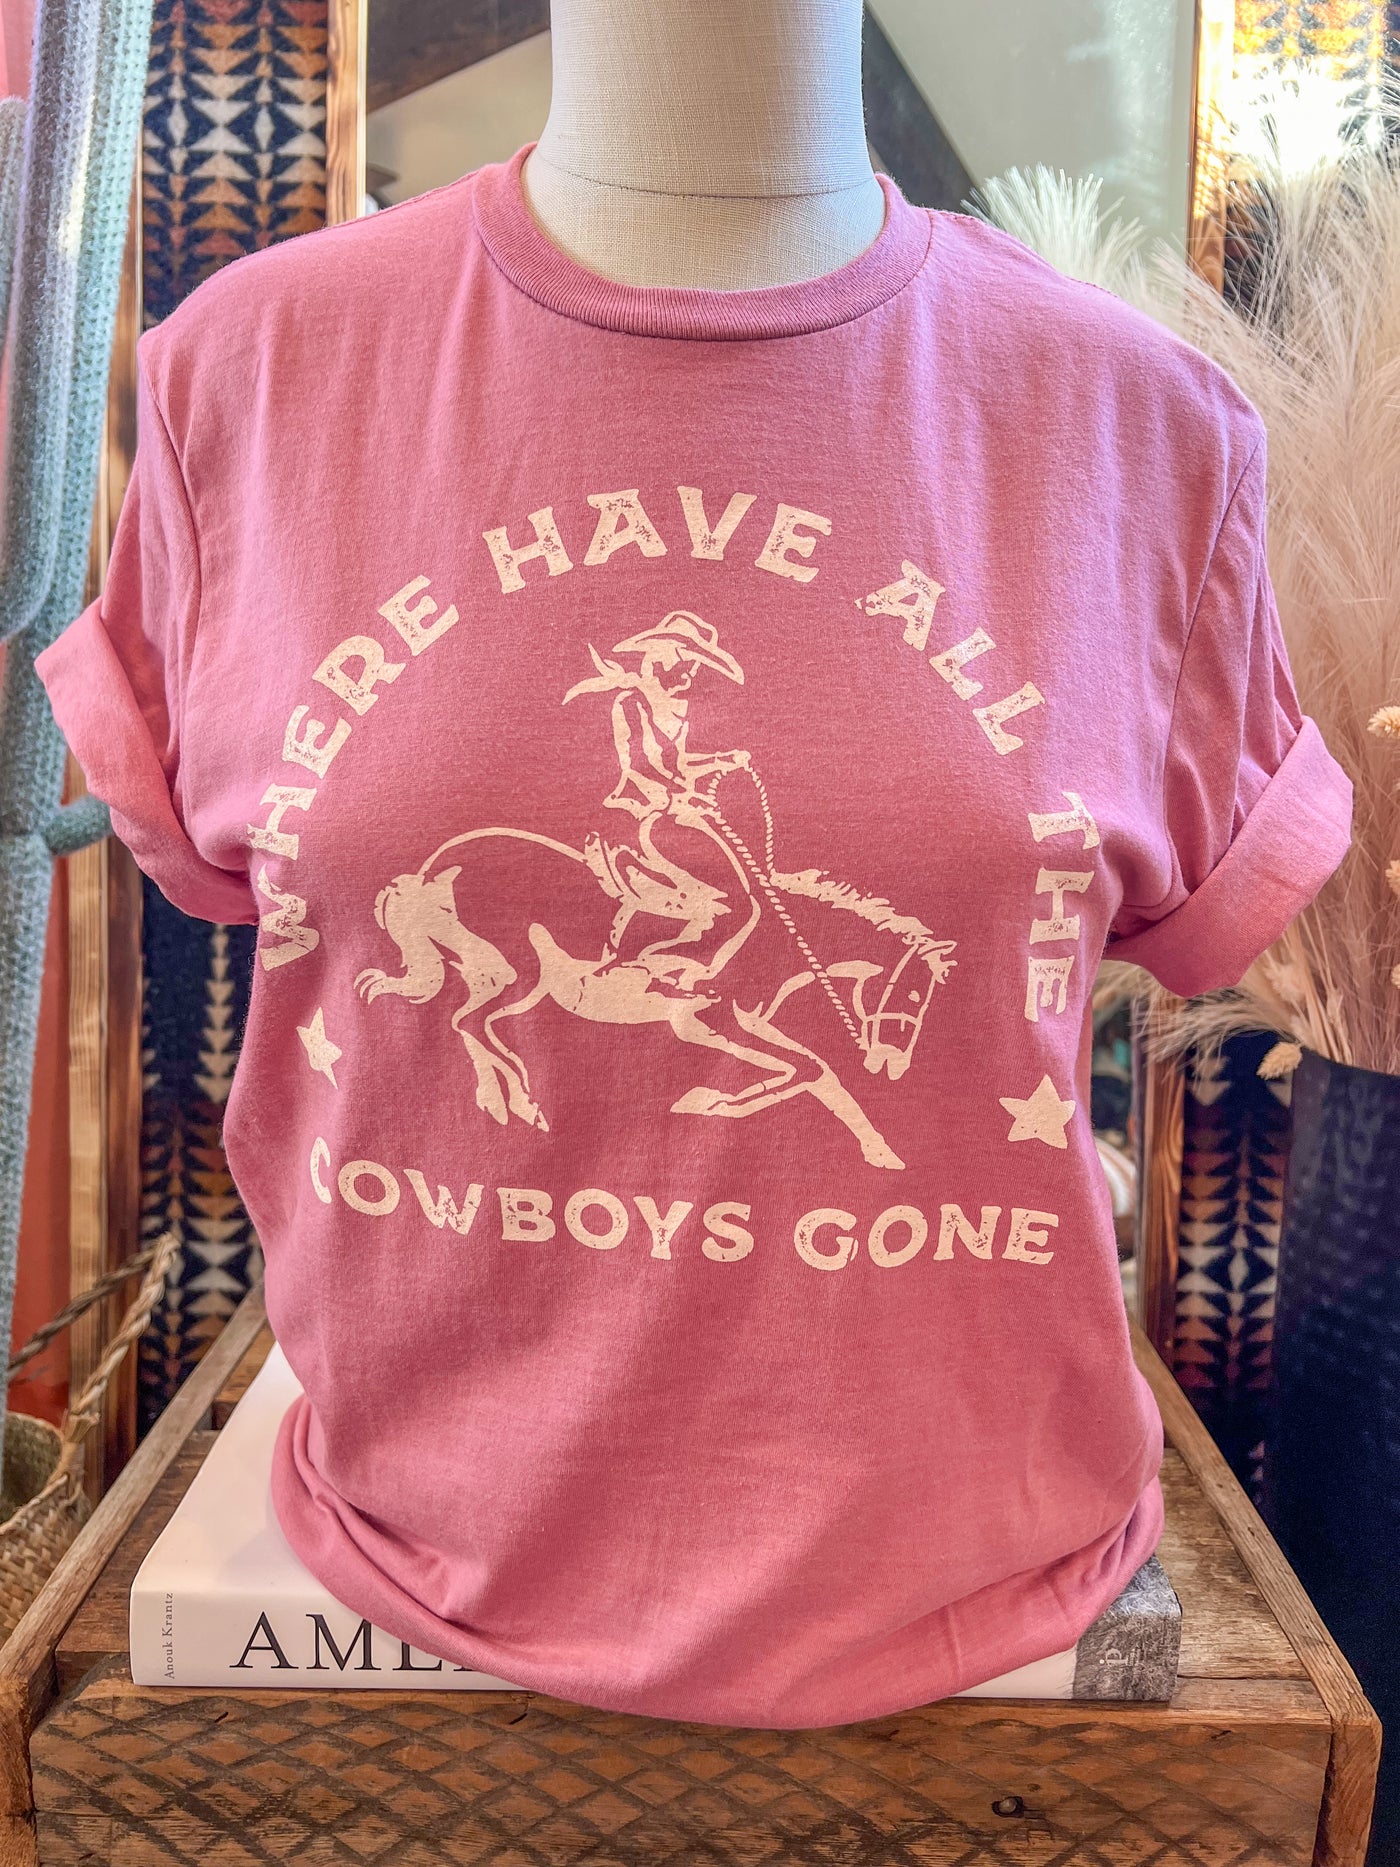 Where Have All The Cowboys Gone Tee